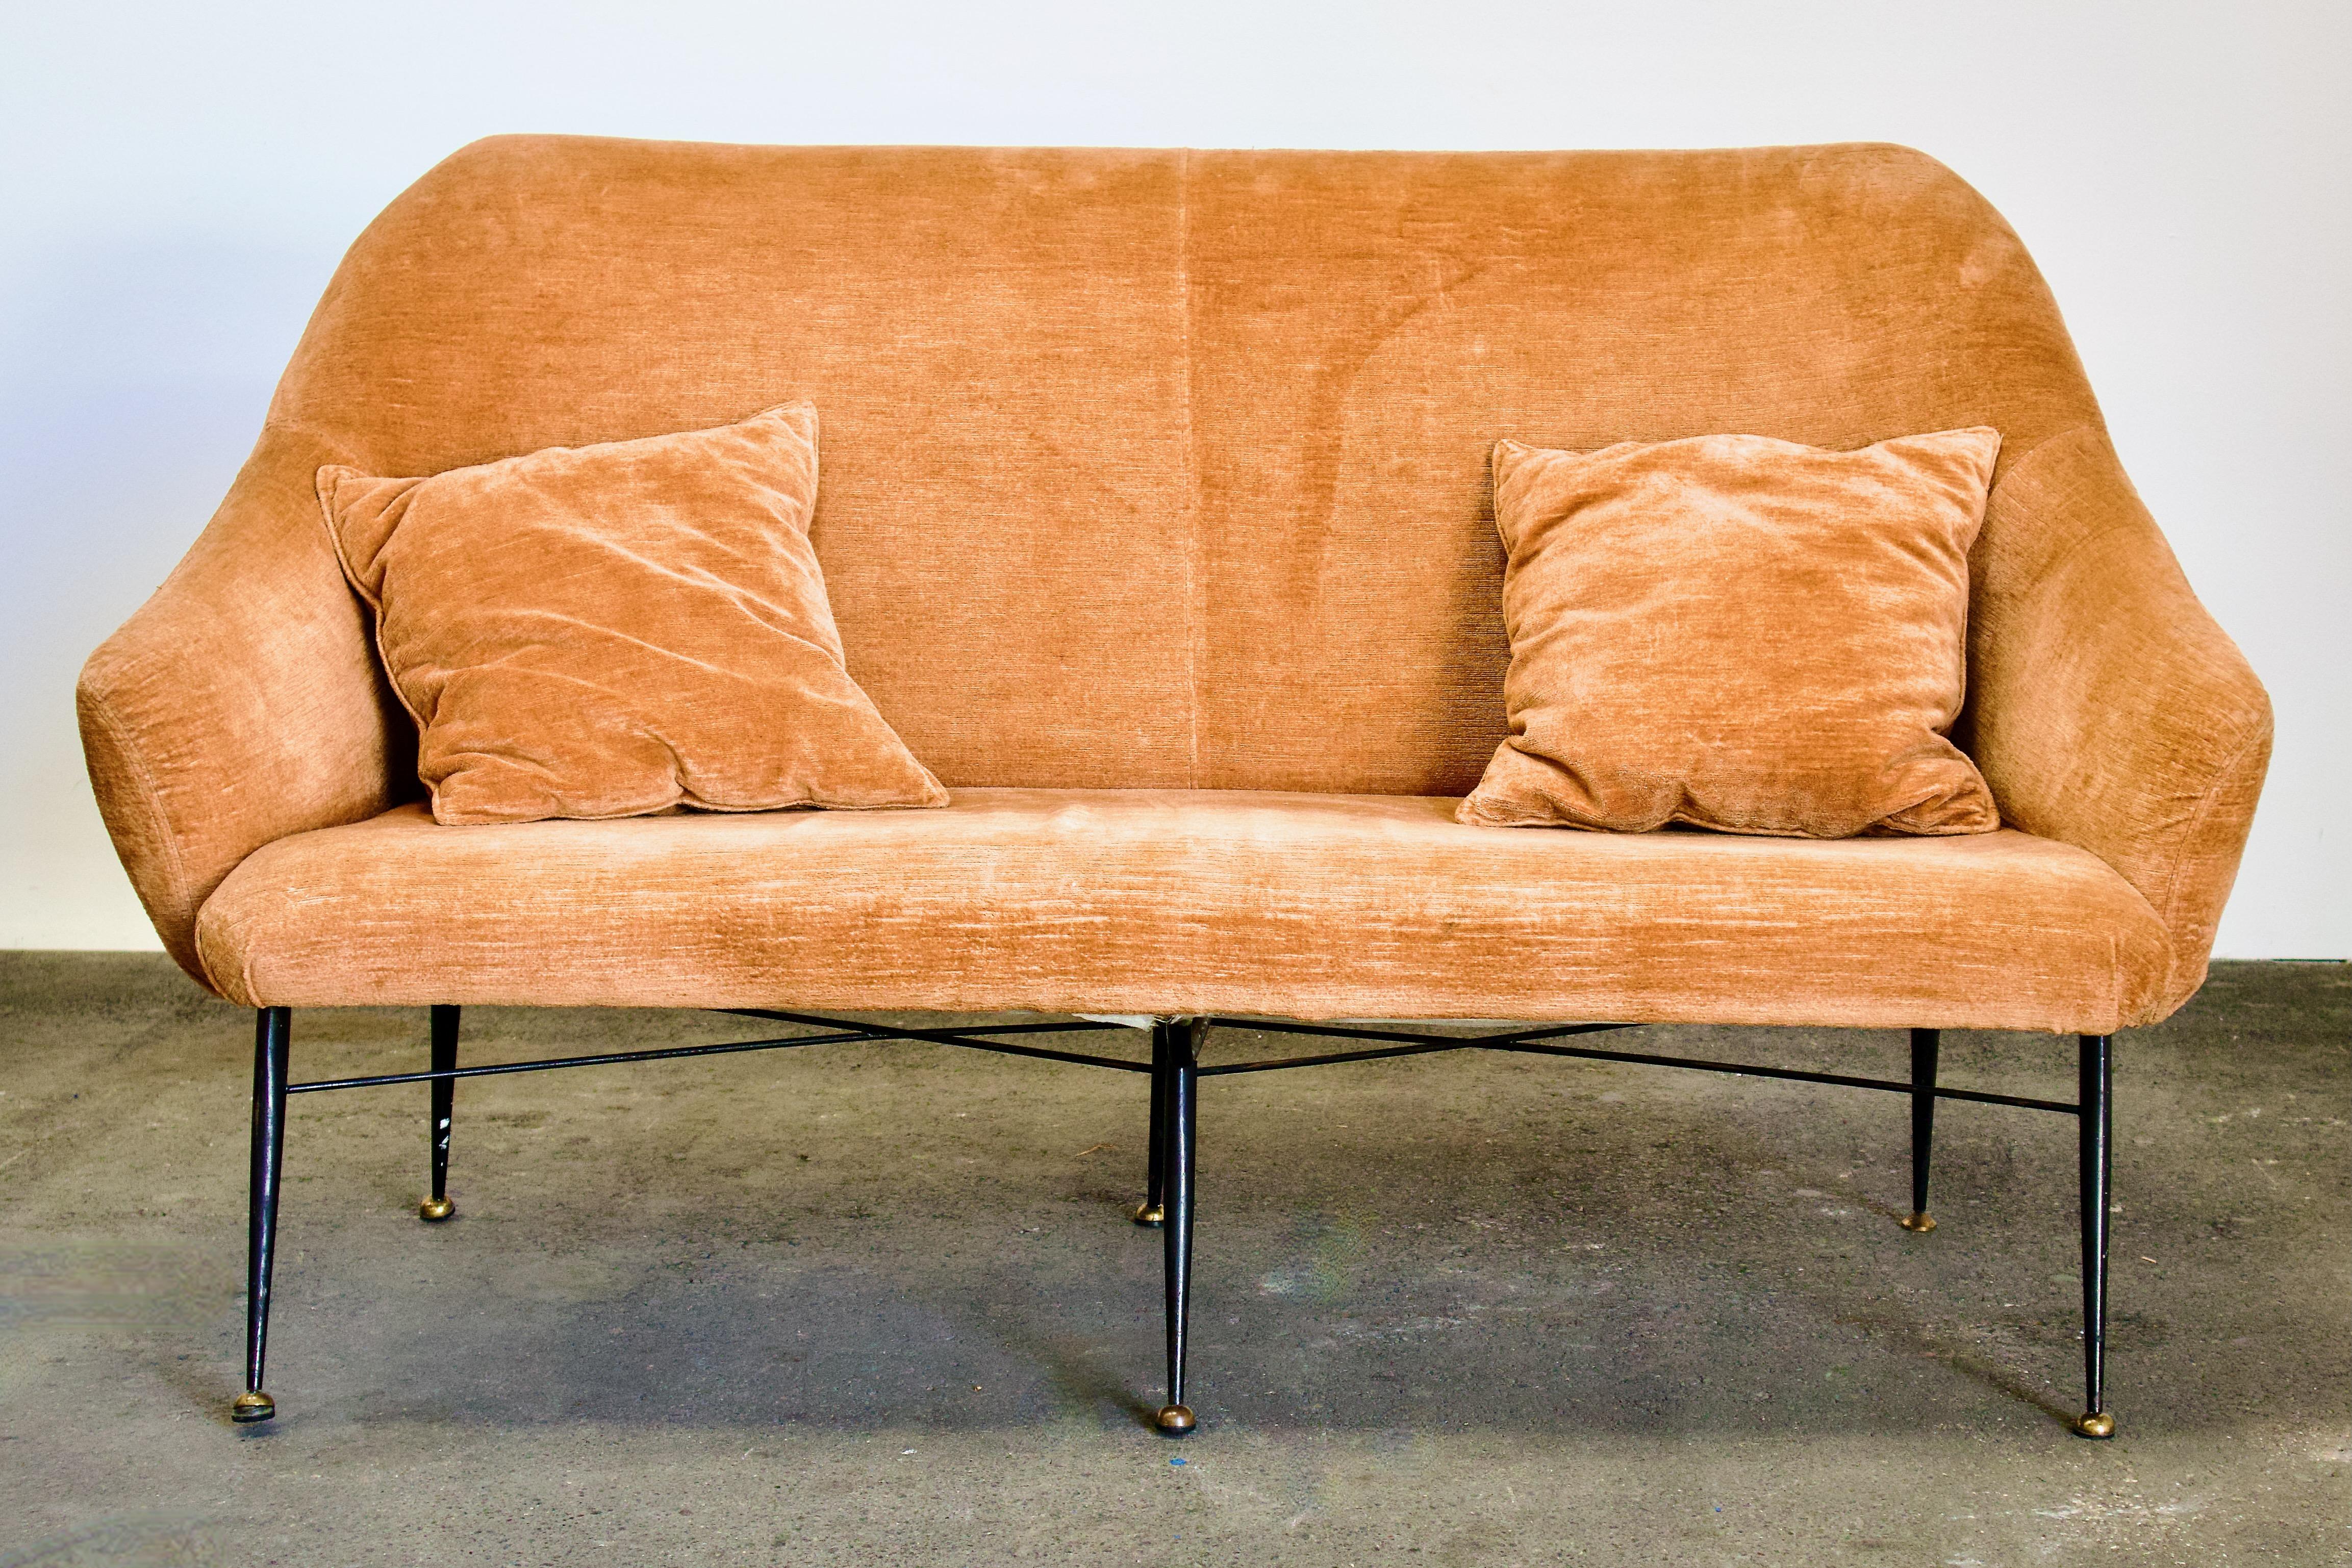 Chic 1950s upholstered Italian Loveseat, Gio Ponti attributed. The gorgeous curved / crescent / hugging shape of this loveseat is magnified by the perch of the slim, tapered and angled metal legs with hemispherical brass feet. Upholstery is velvet